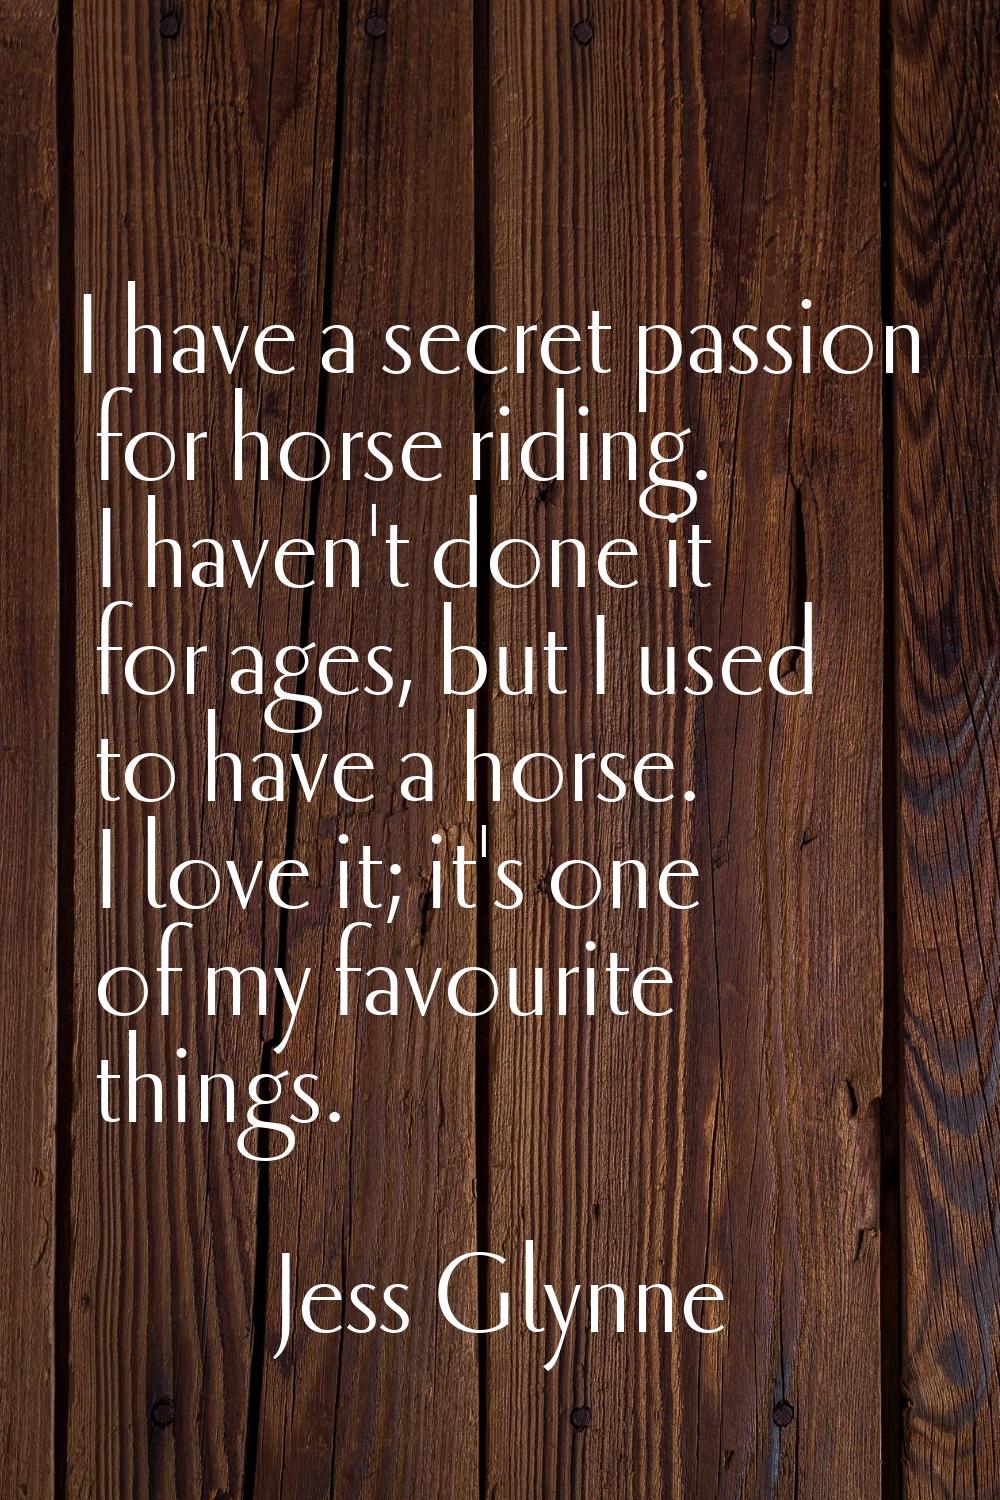 I have a secret passion for horse riding. I haven't done it for ages, but I used to have a horse. I